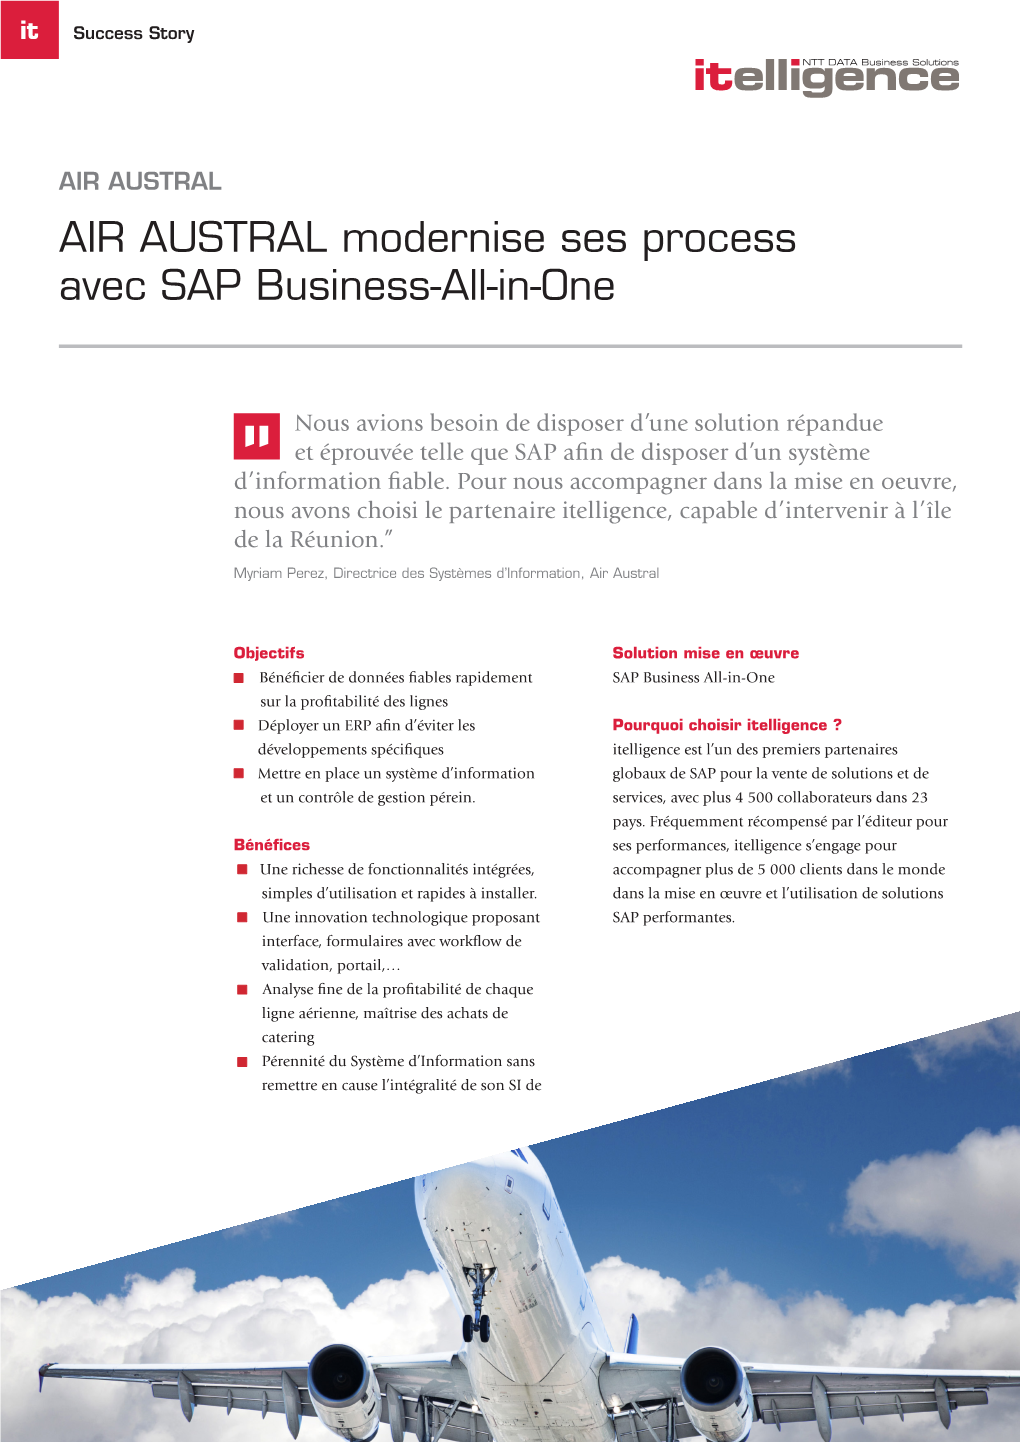 AIR AUSTRAL Modernise Ses Process Avec SAP Business-All-In-One